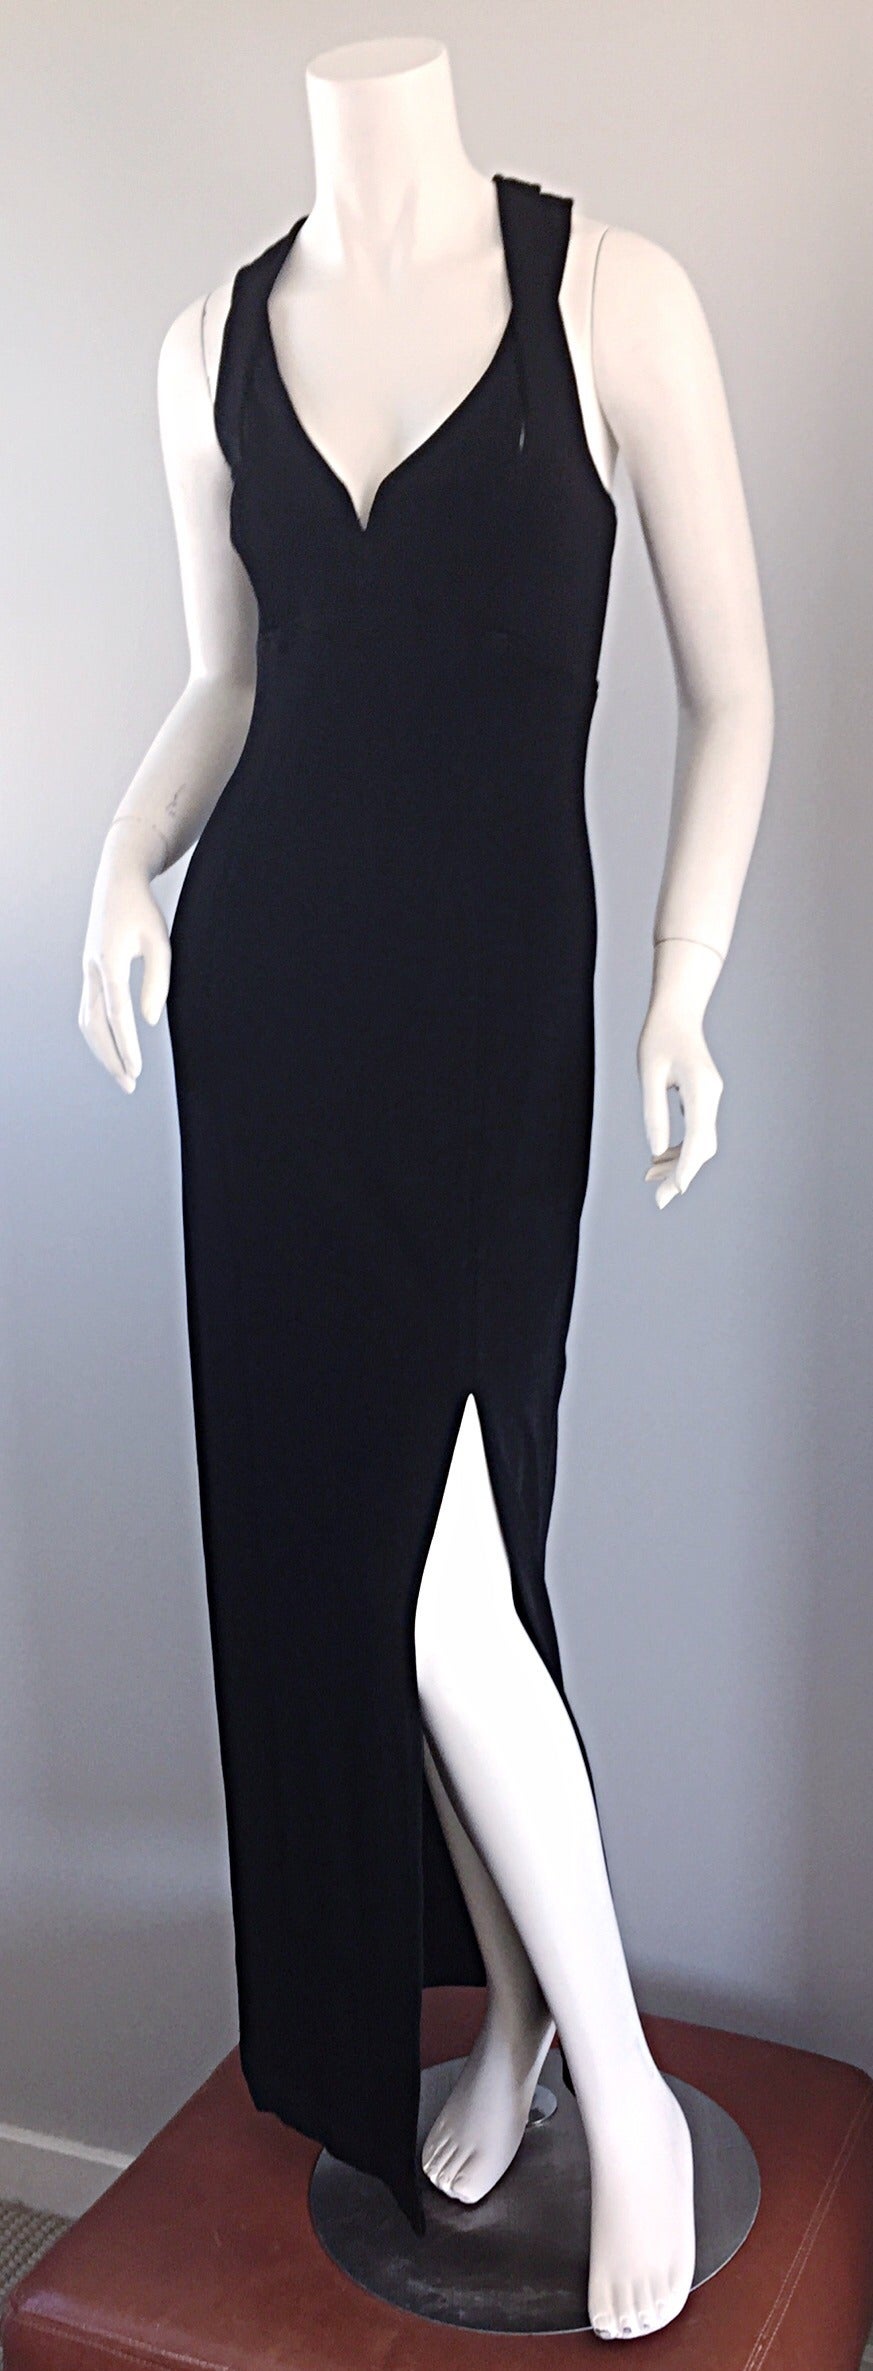 Sexiest vintage Tadashi Sohji black gown, with cage/cut-out back! Extremely flattering, with just the right amount of sexiness! Slight cut-out detail at bust, with a slit up the front side. Sweetheart neckline. Bodycon fit, with fantastic stretch